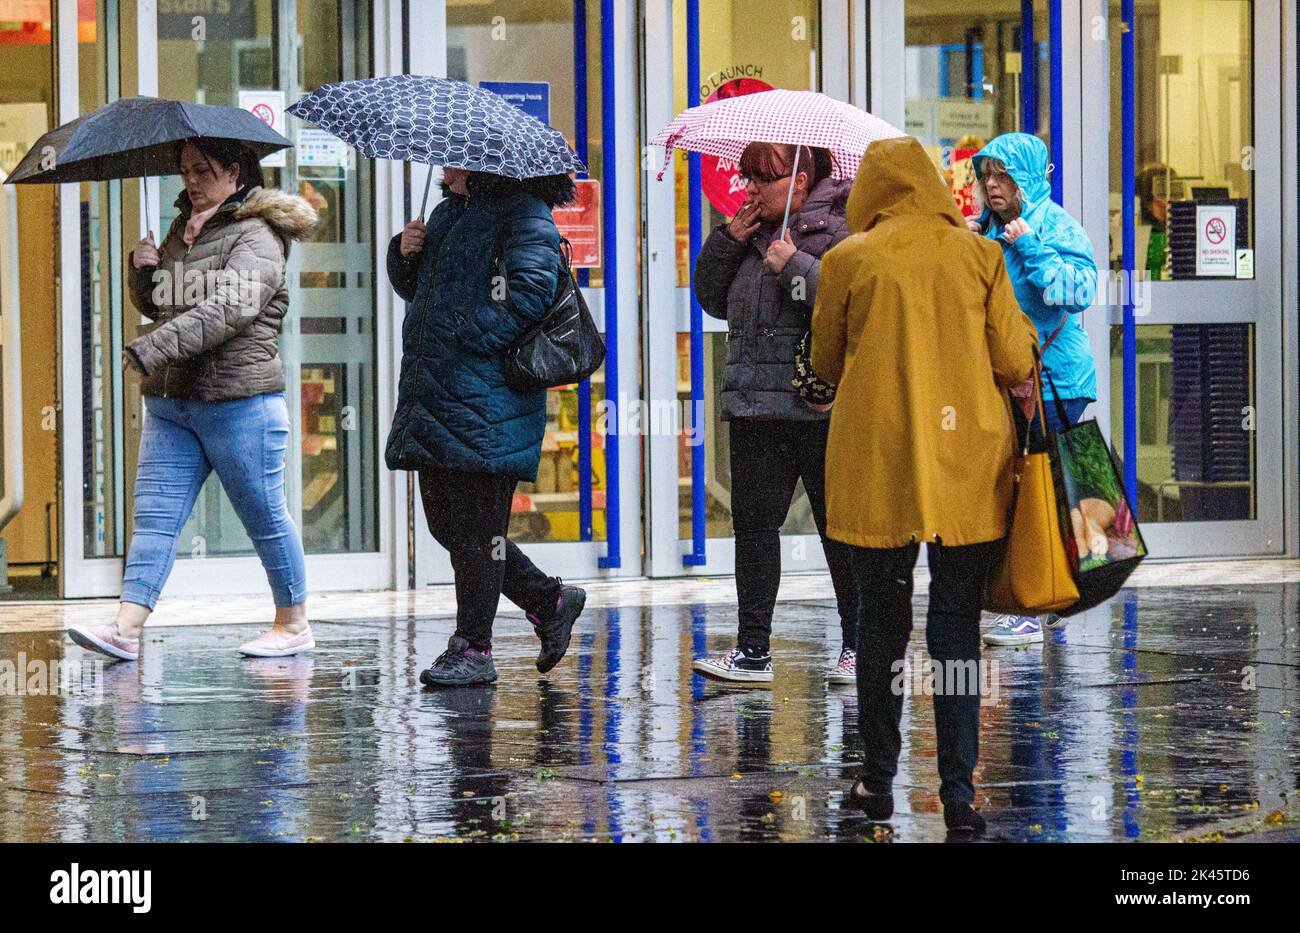 Dundee, Tayside, Scotland, UK. 30th Sep, 2022. UK Weather. A mix of unexpected heavy rain and strong wind gusts across the northeast of Scotland, with temperatures reaching 14°C. Despite the wet and windy Autumn morning, local women sheltering under brollies are out and about shopping in Dundee city centre, although somewhat cautiously due to the extremely high cost of living. Credit: Dundee Photographics/Alamy Live News Stock Photo